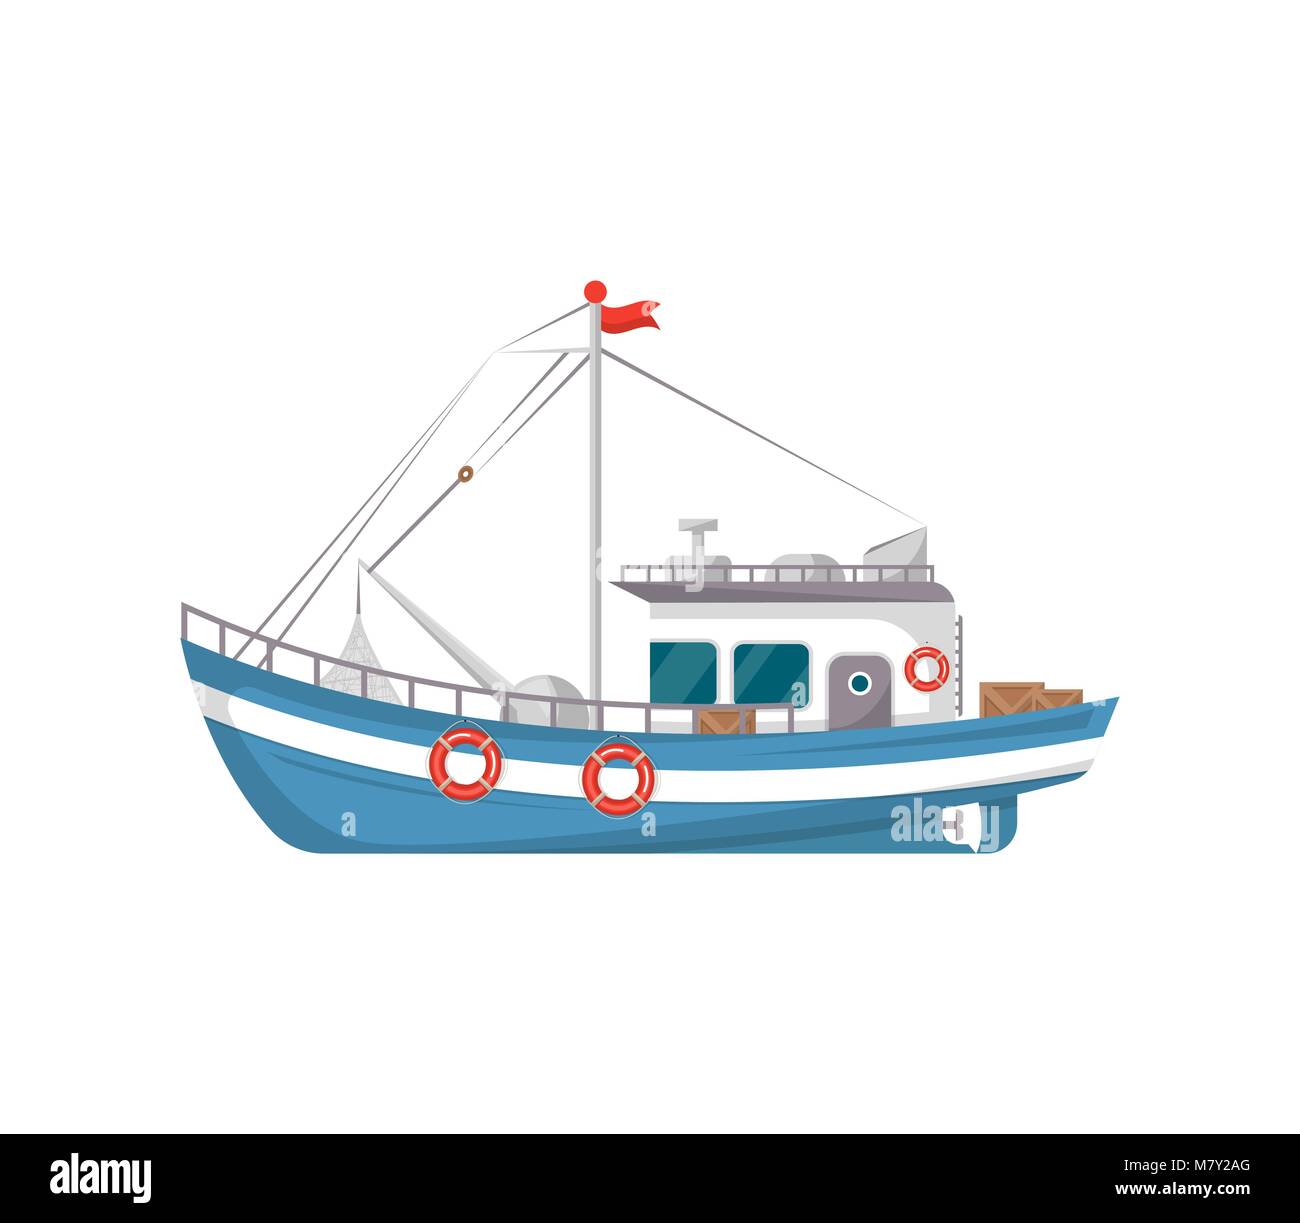 Commercial fishing boat side view icon Stock Vector